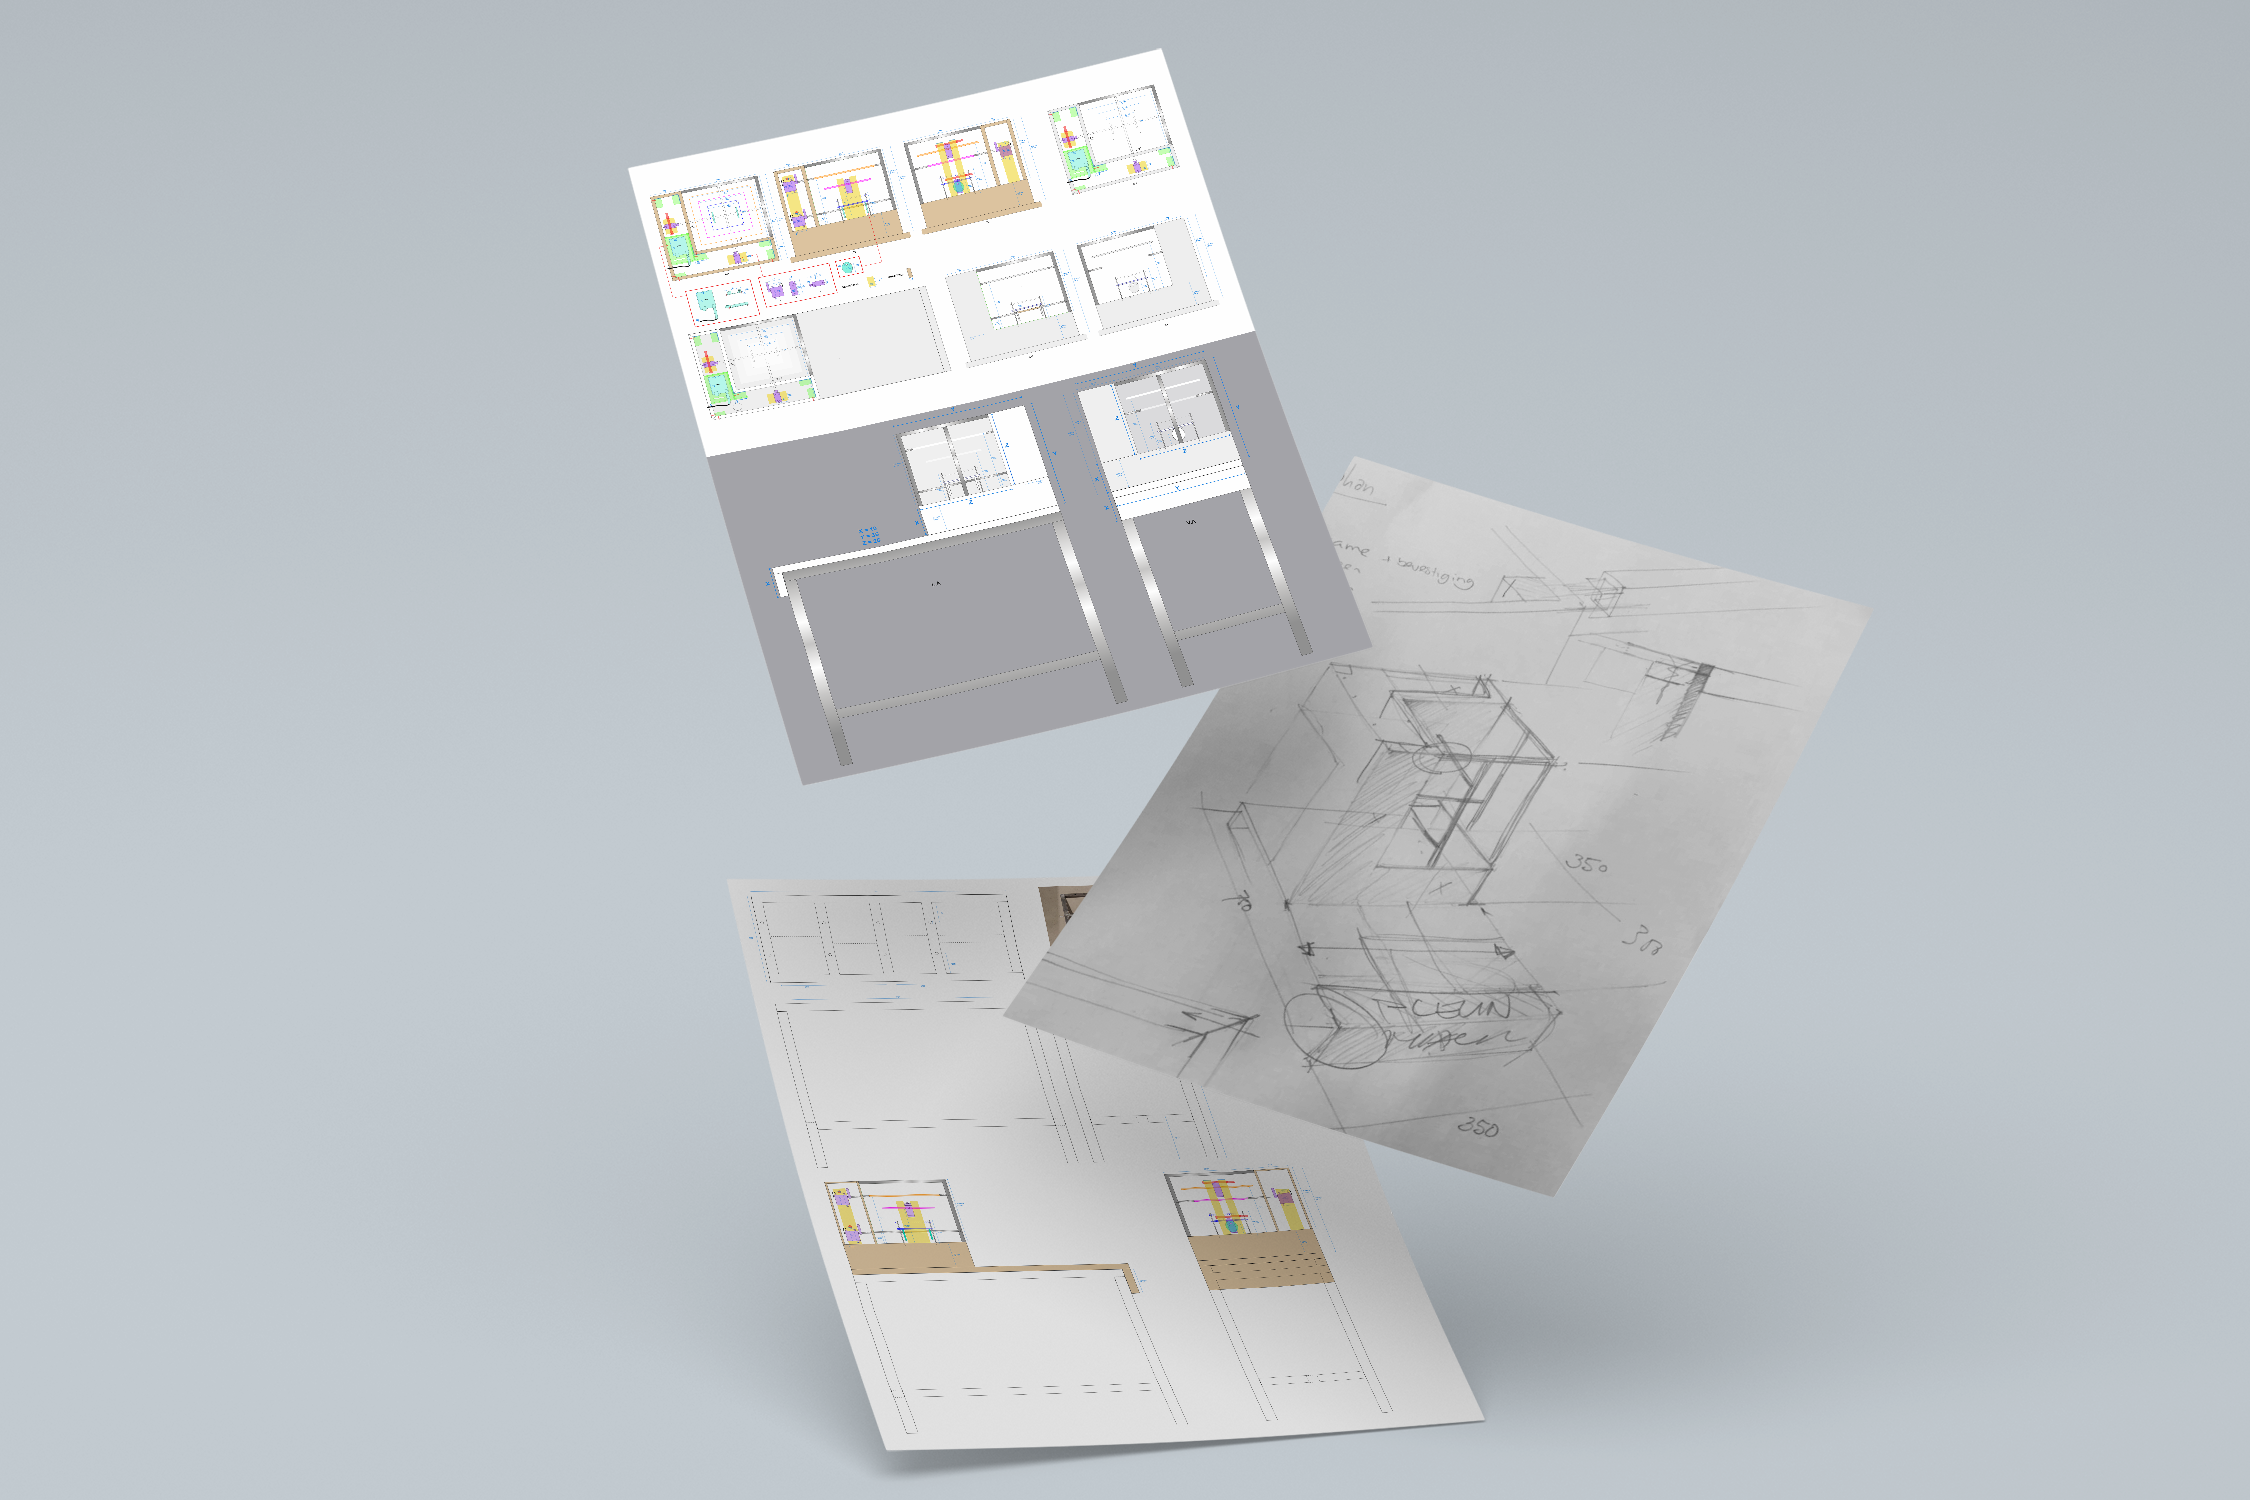 Img - technical drawings in mockup